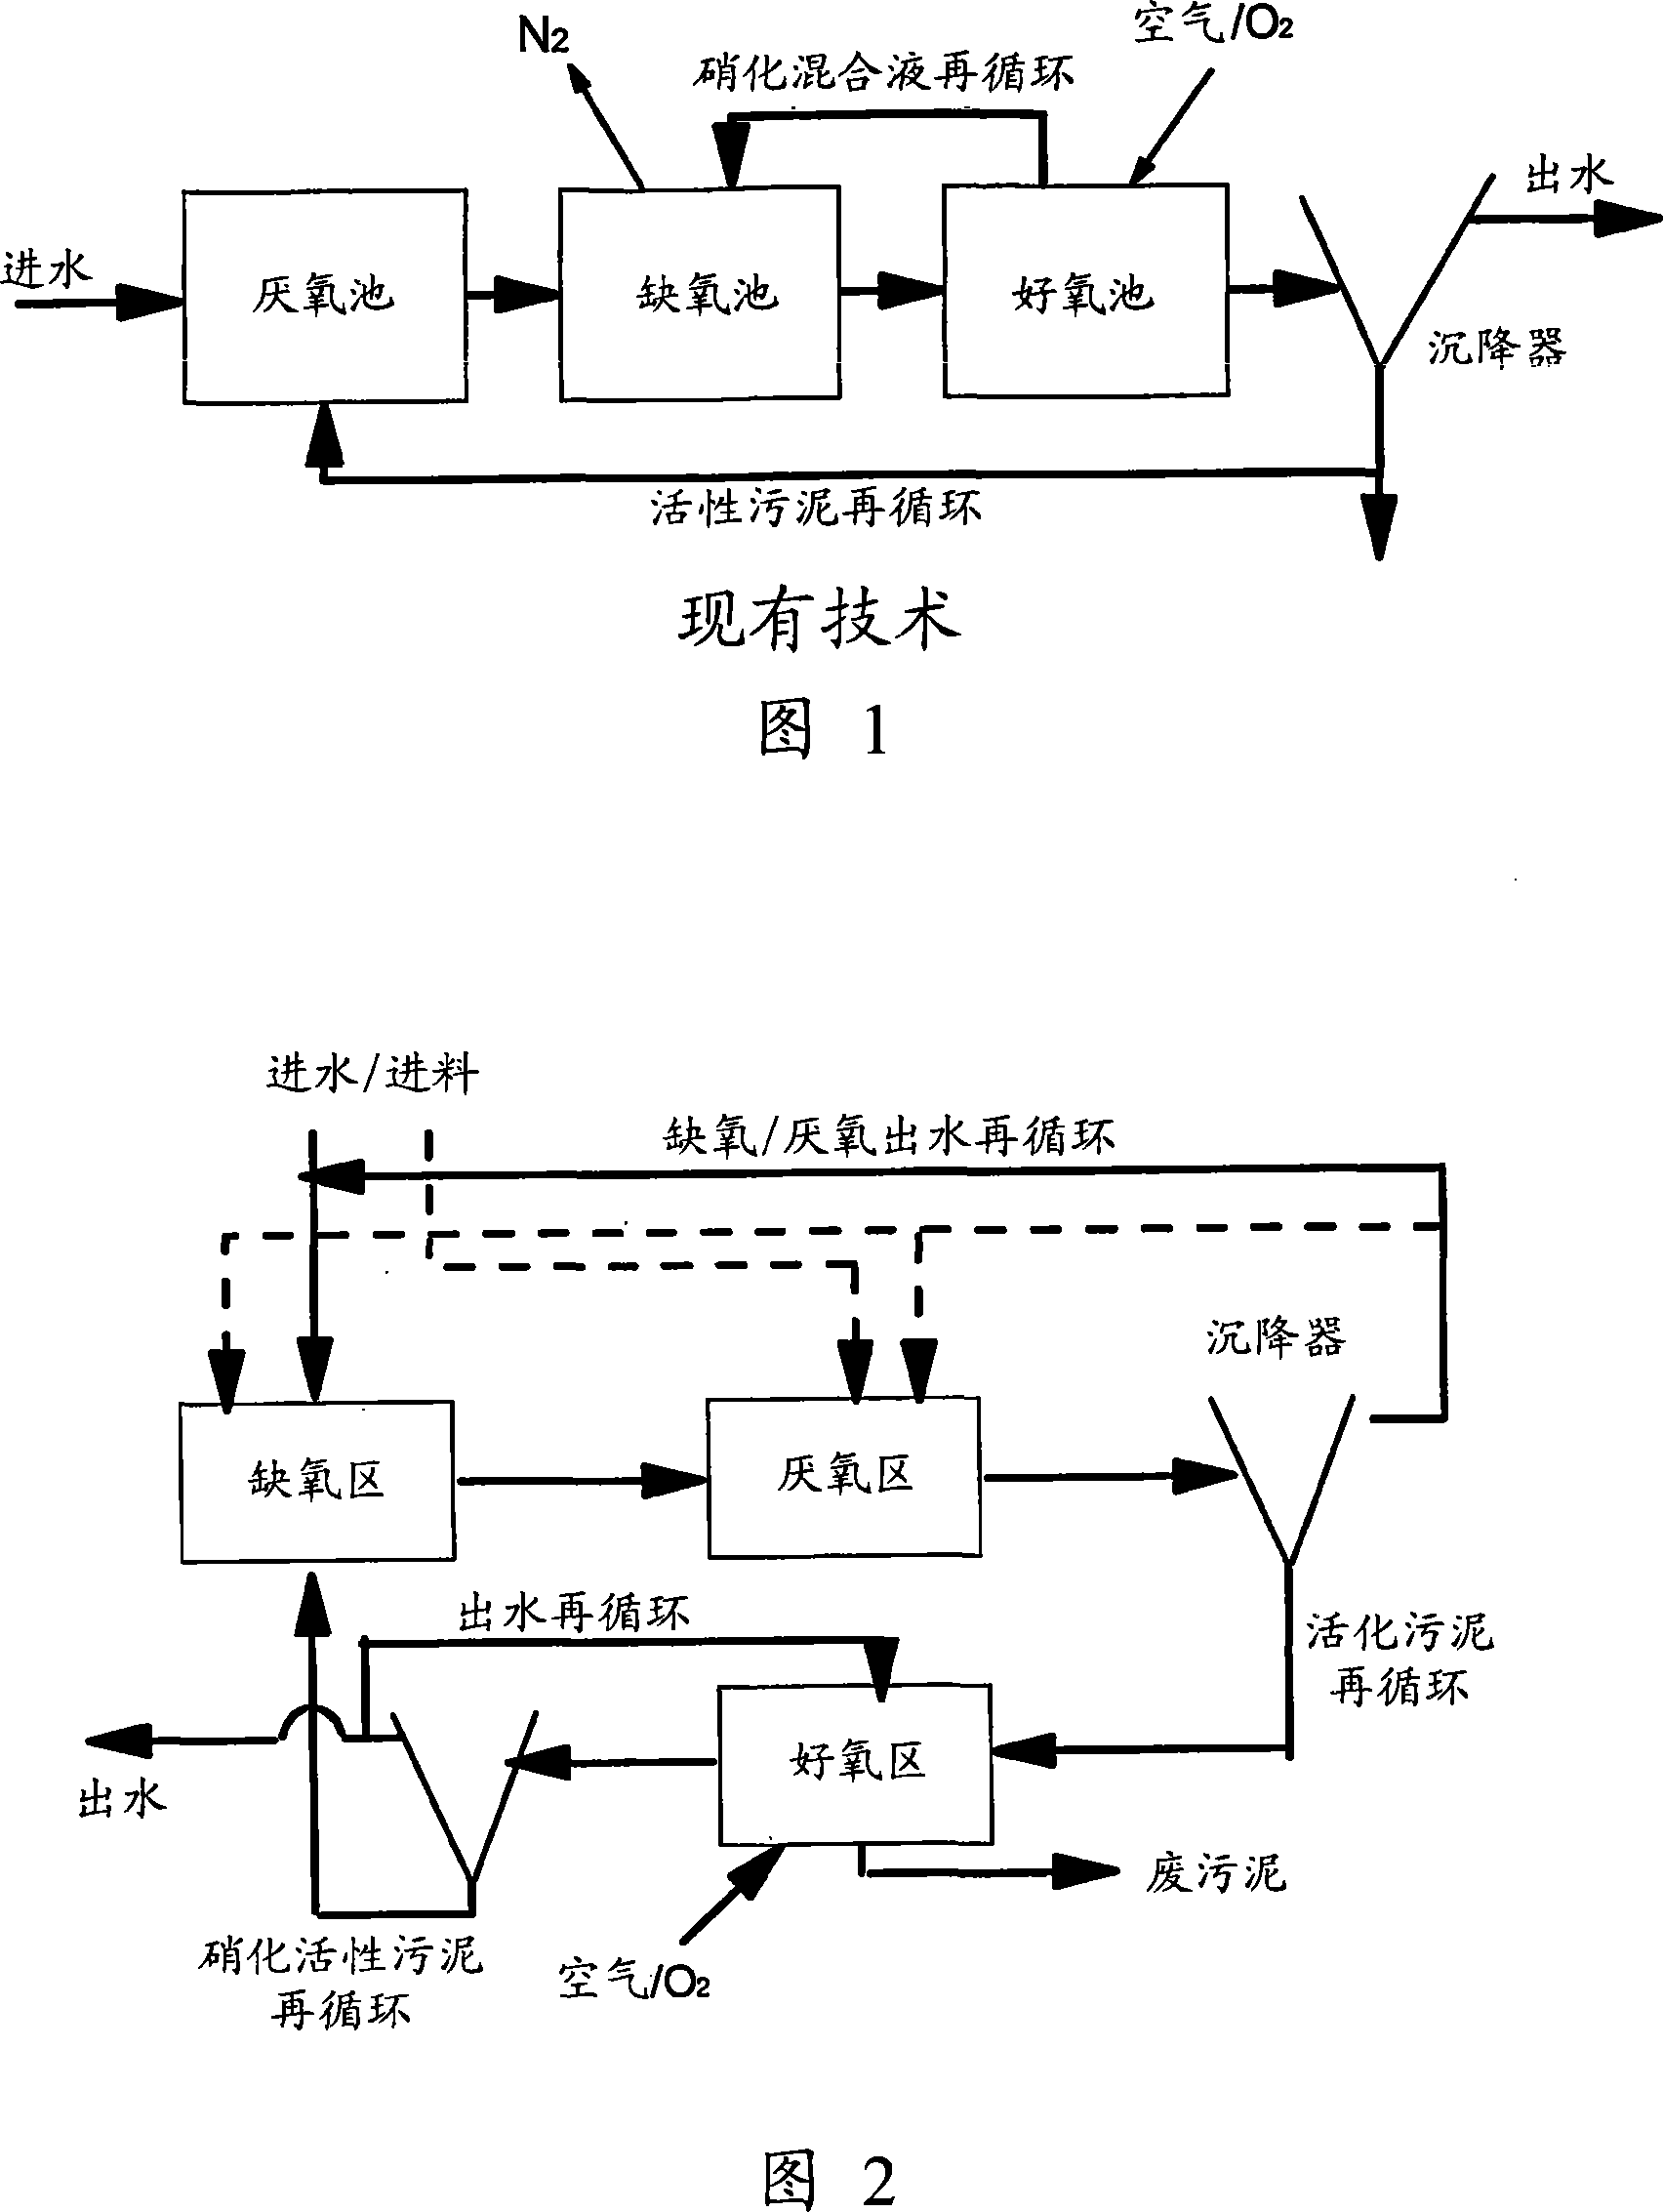 Liquid-solid circulating fluidized bed waste water treatment system for simultaneous carbon, nitrogen and phosphorus removal